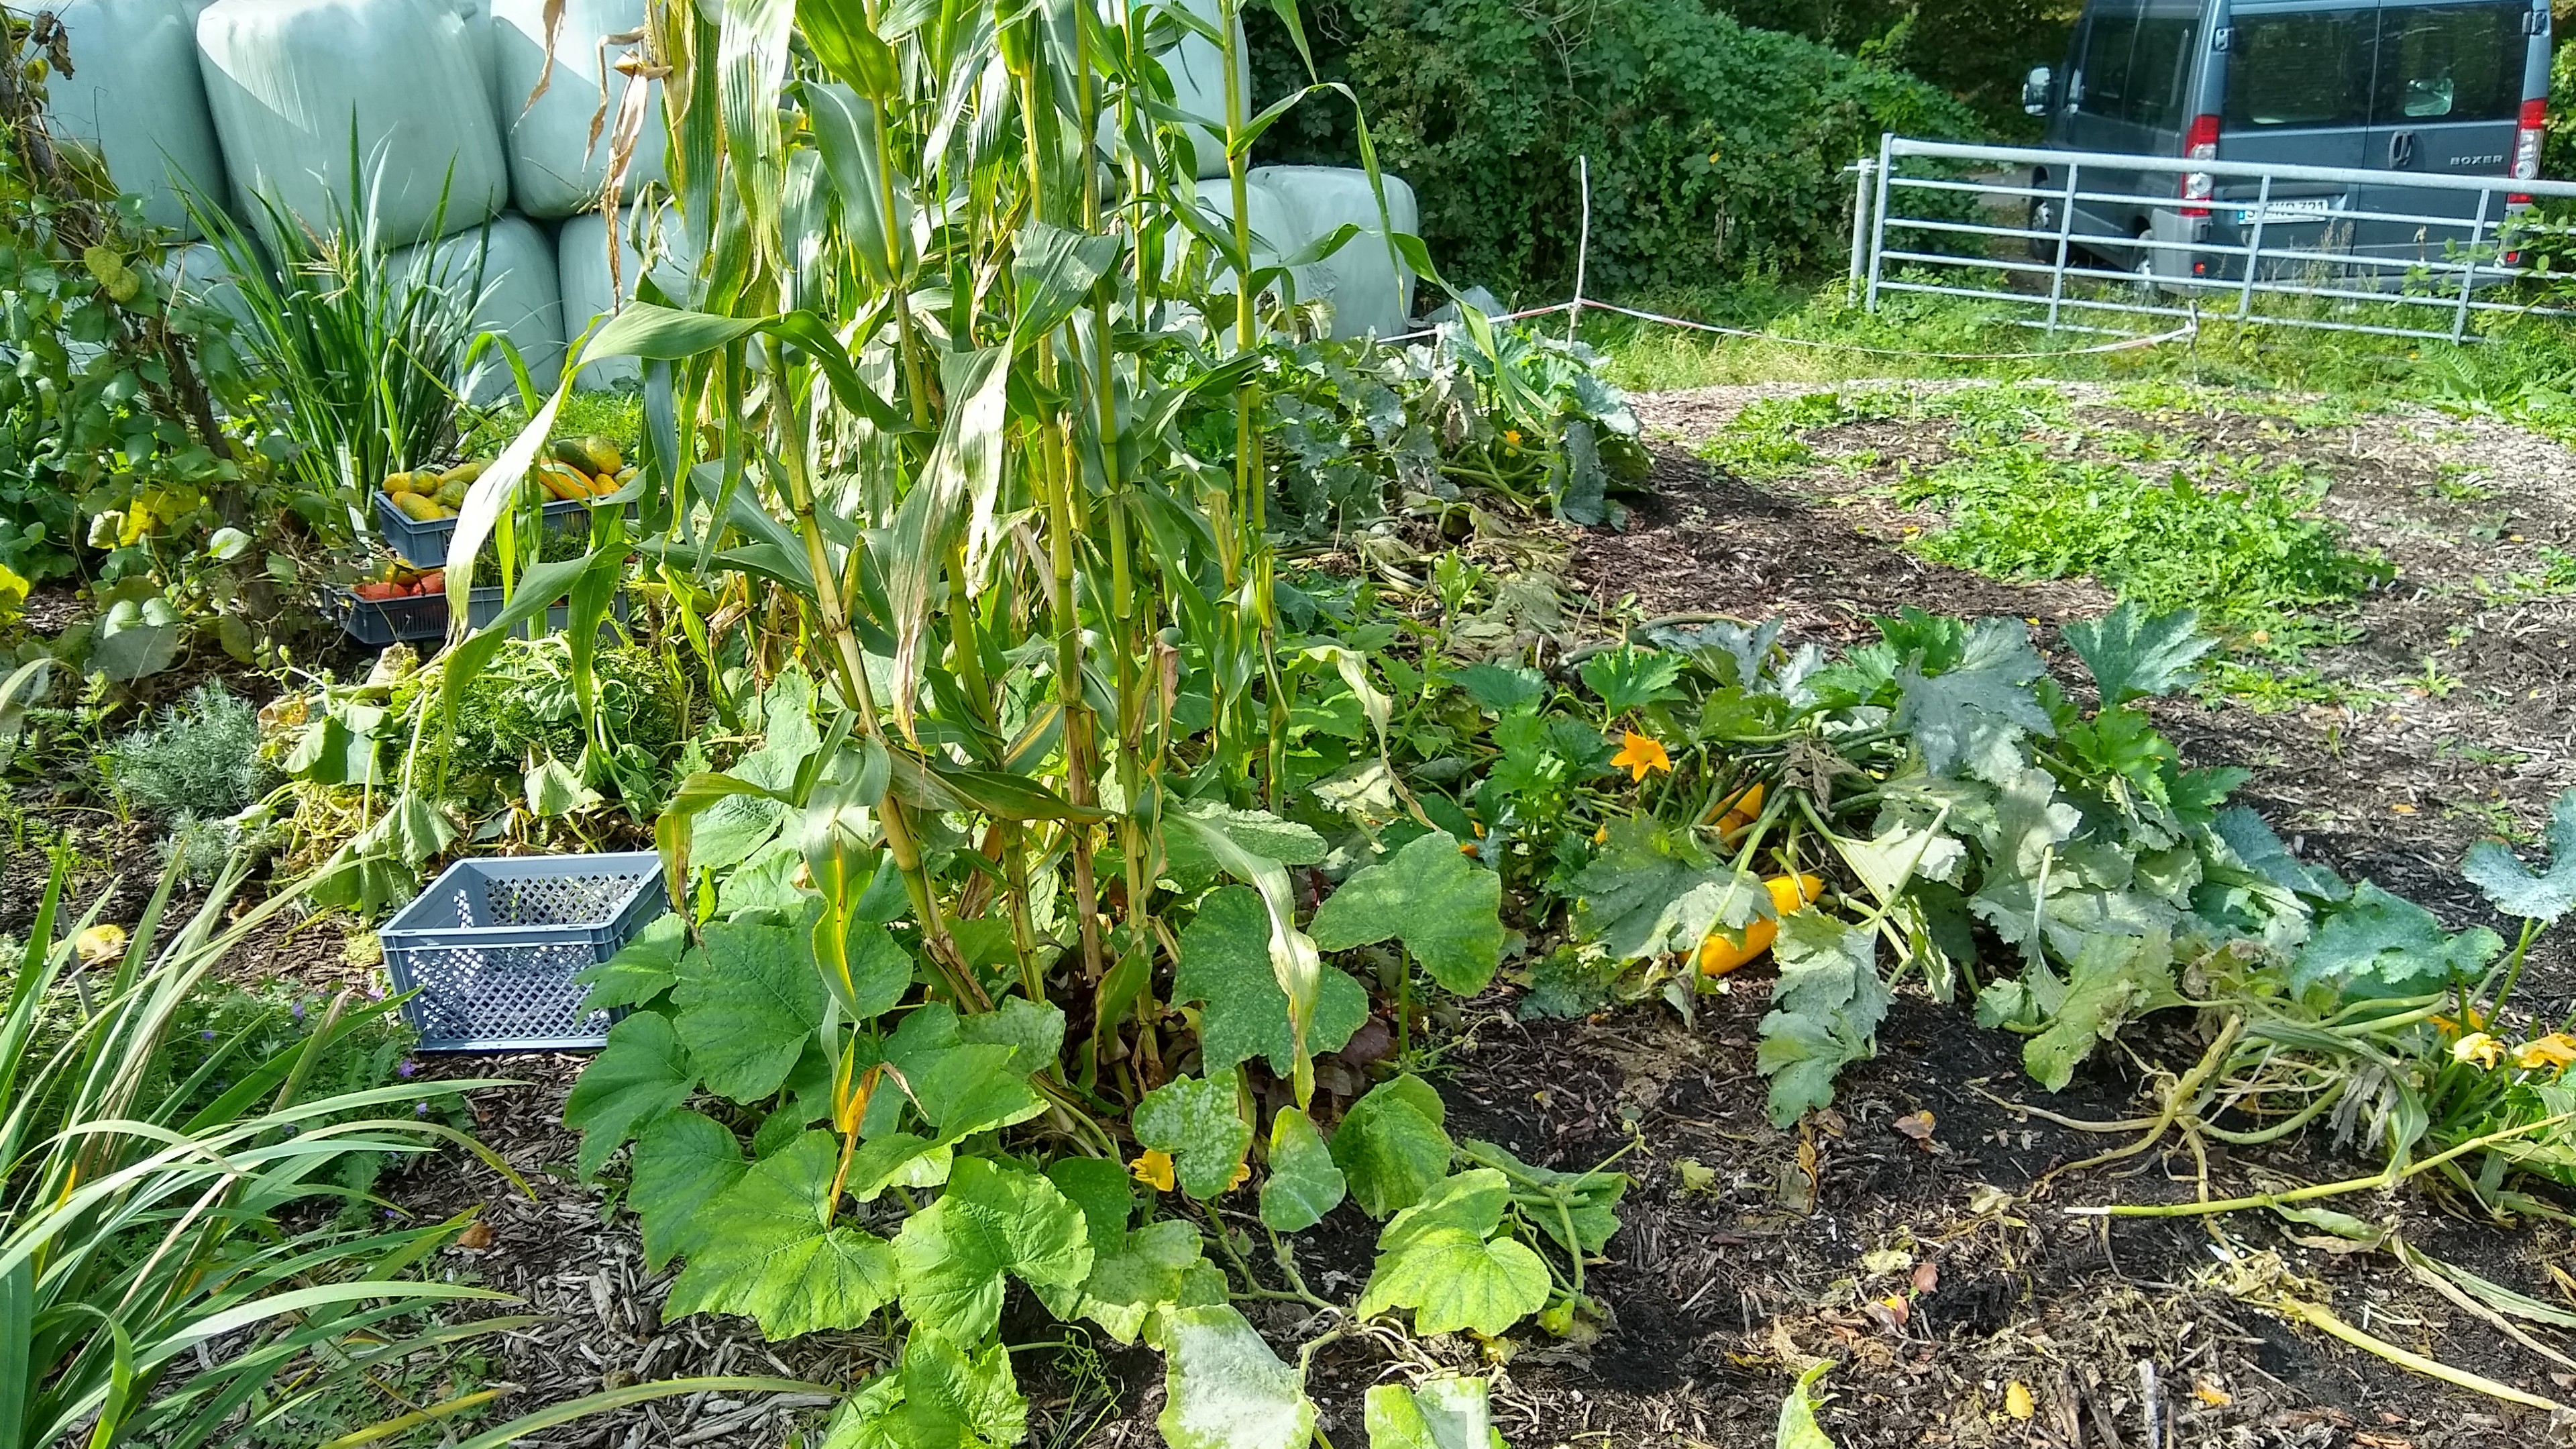 beds with sweatcorn, courgettes and pumpkin